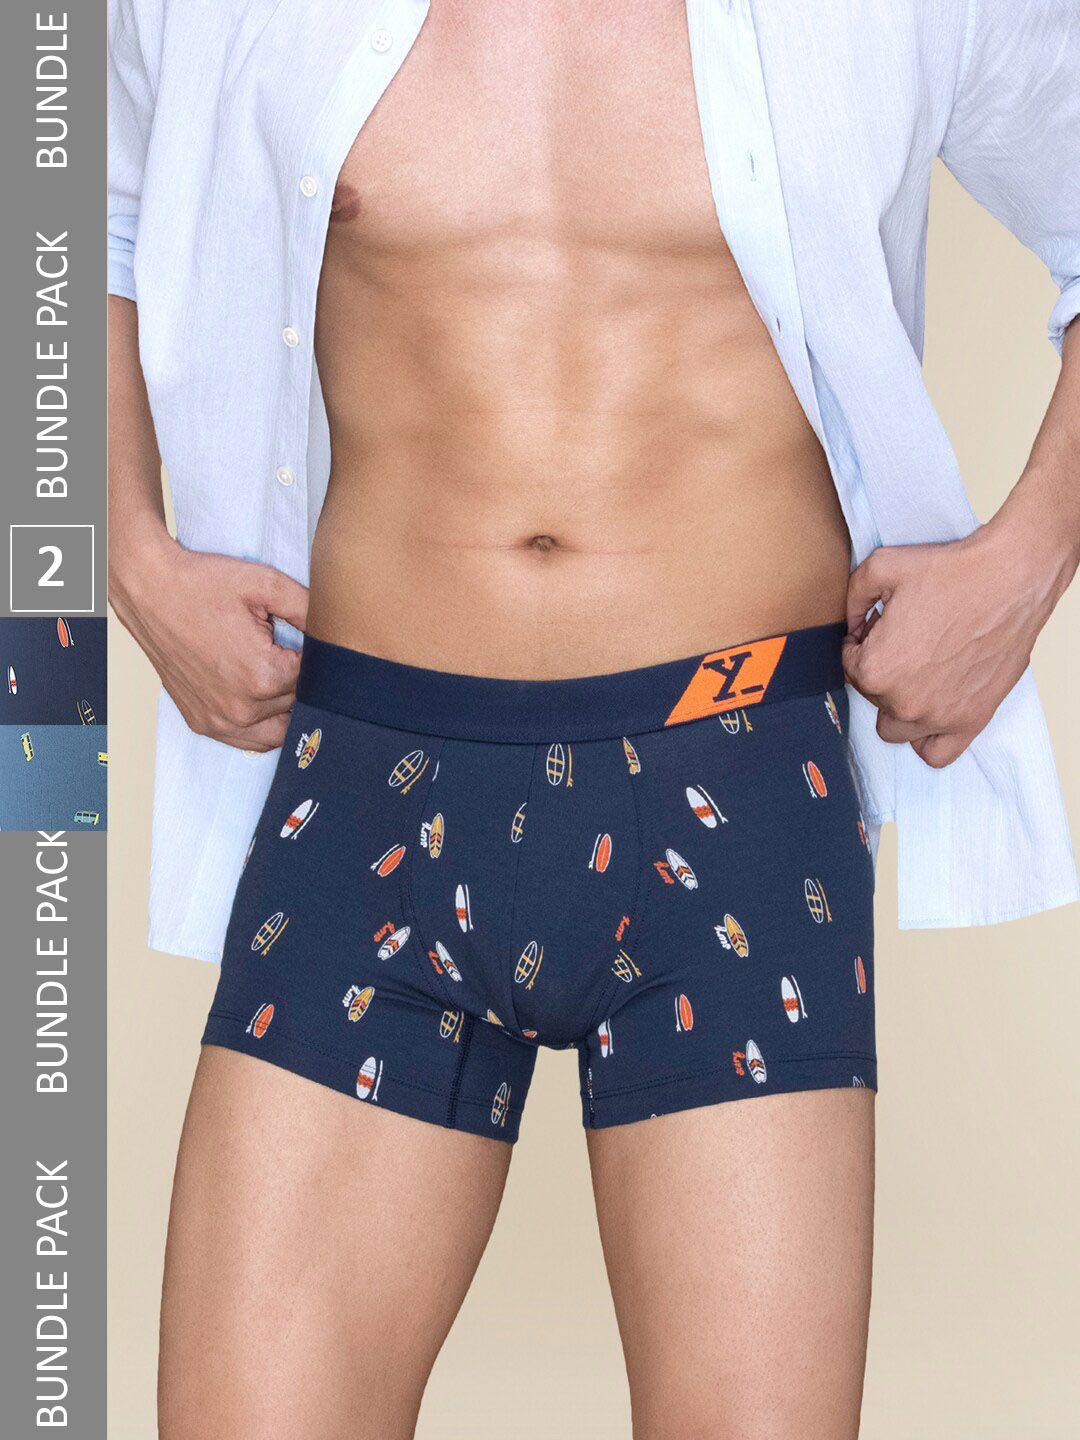 xyxx pack of 2 printed cotton trunks xytrnk2pckn643